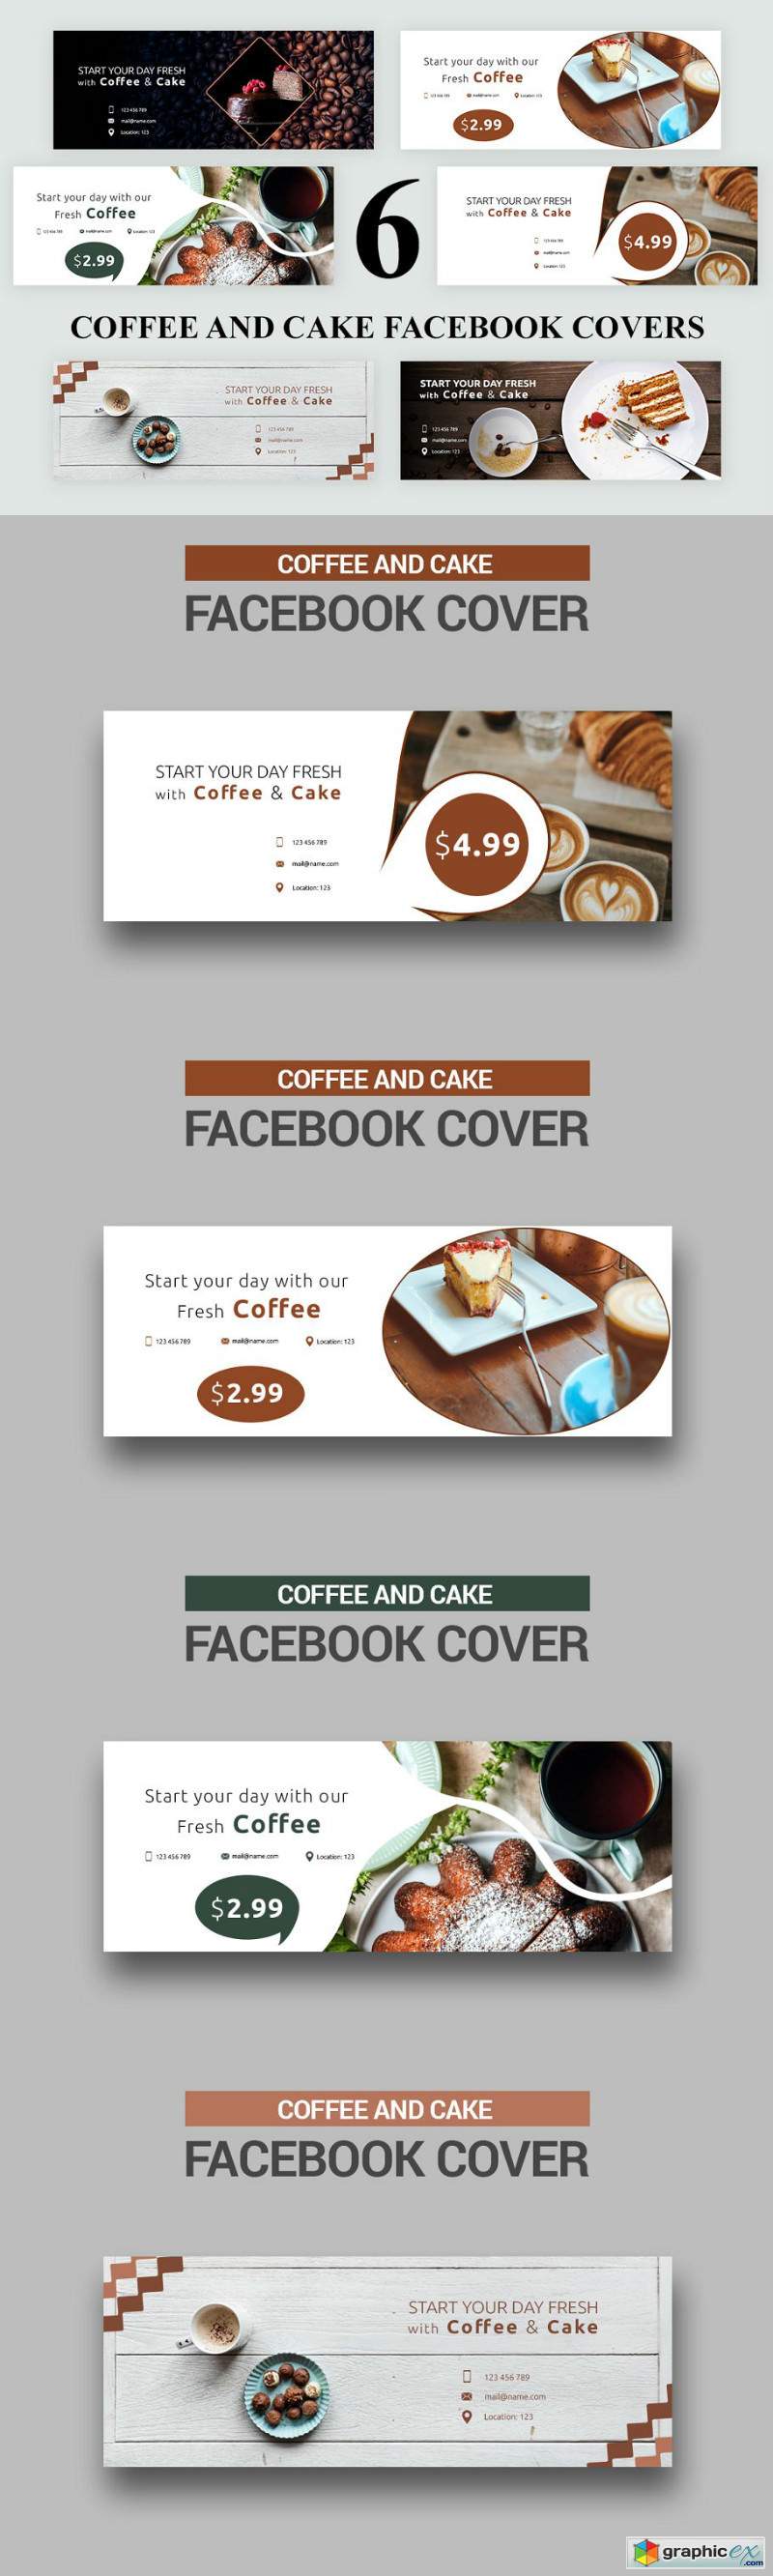 Coffee and Cake Facebook Covers - SK